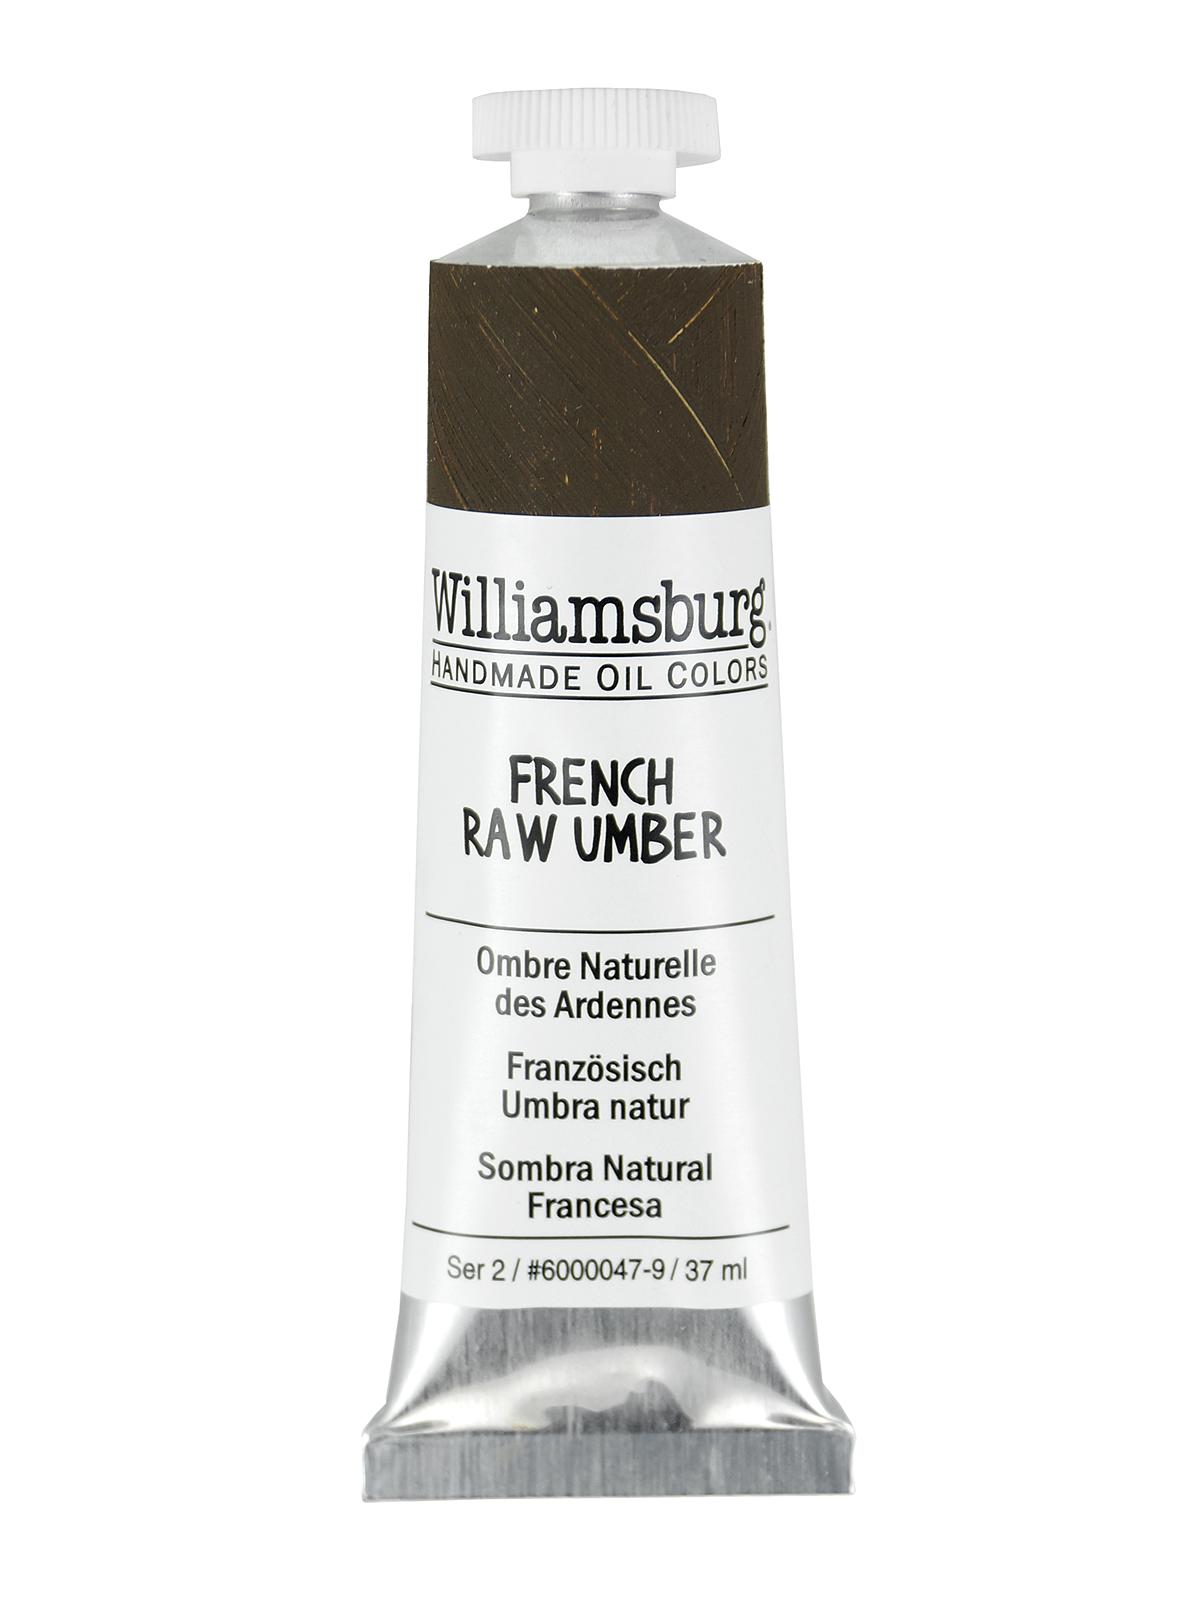 Handmade Oil Colors French Raw Umber 37 Ml